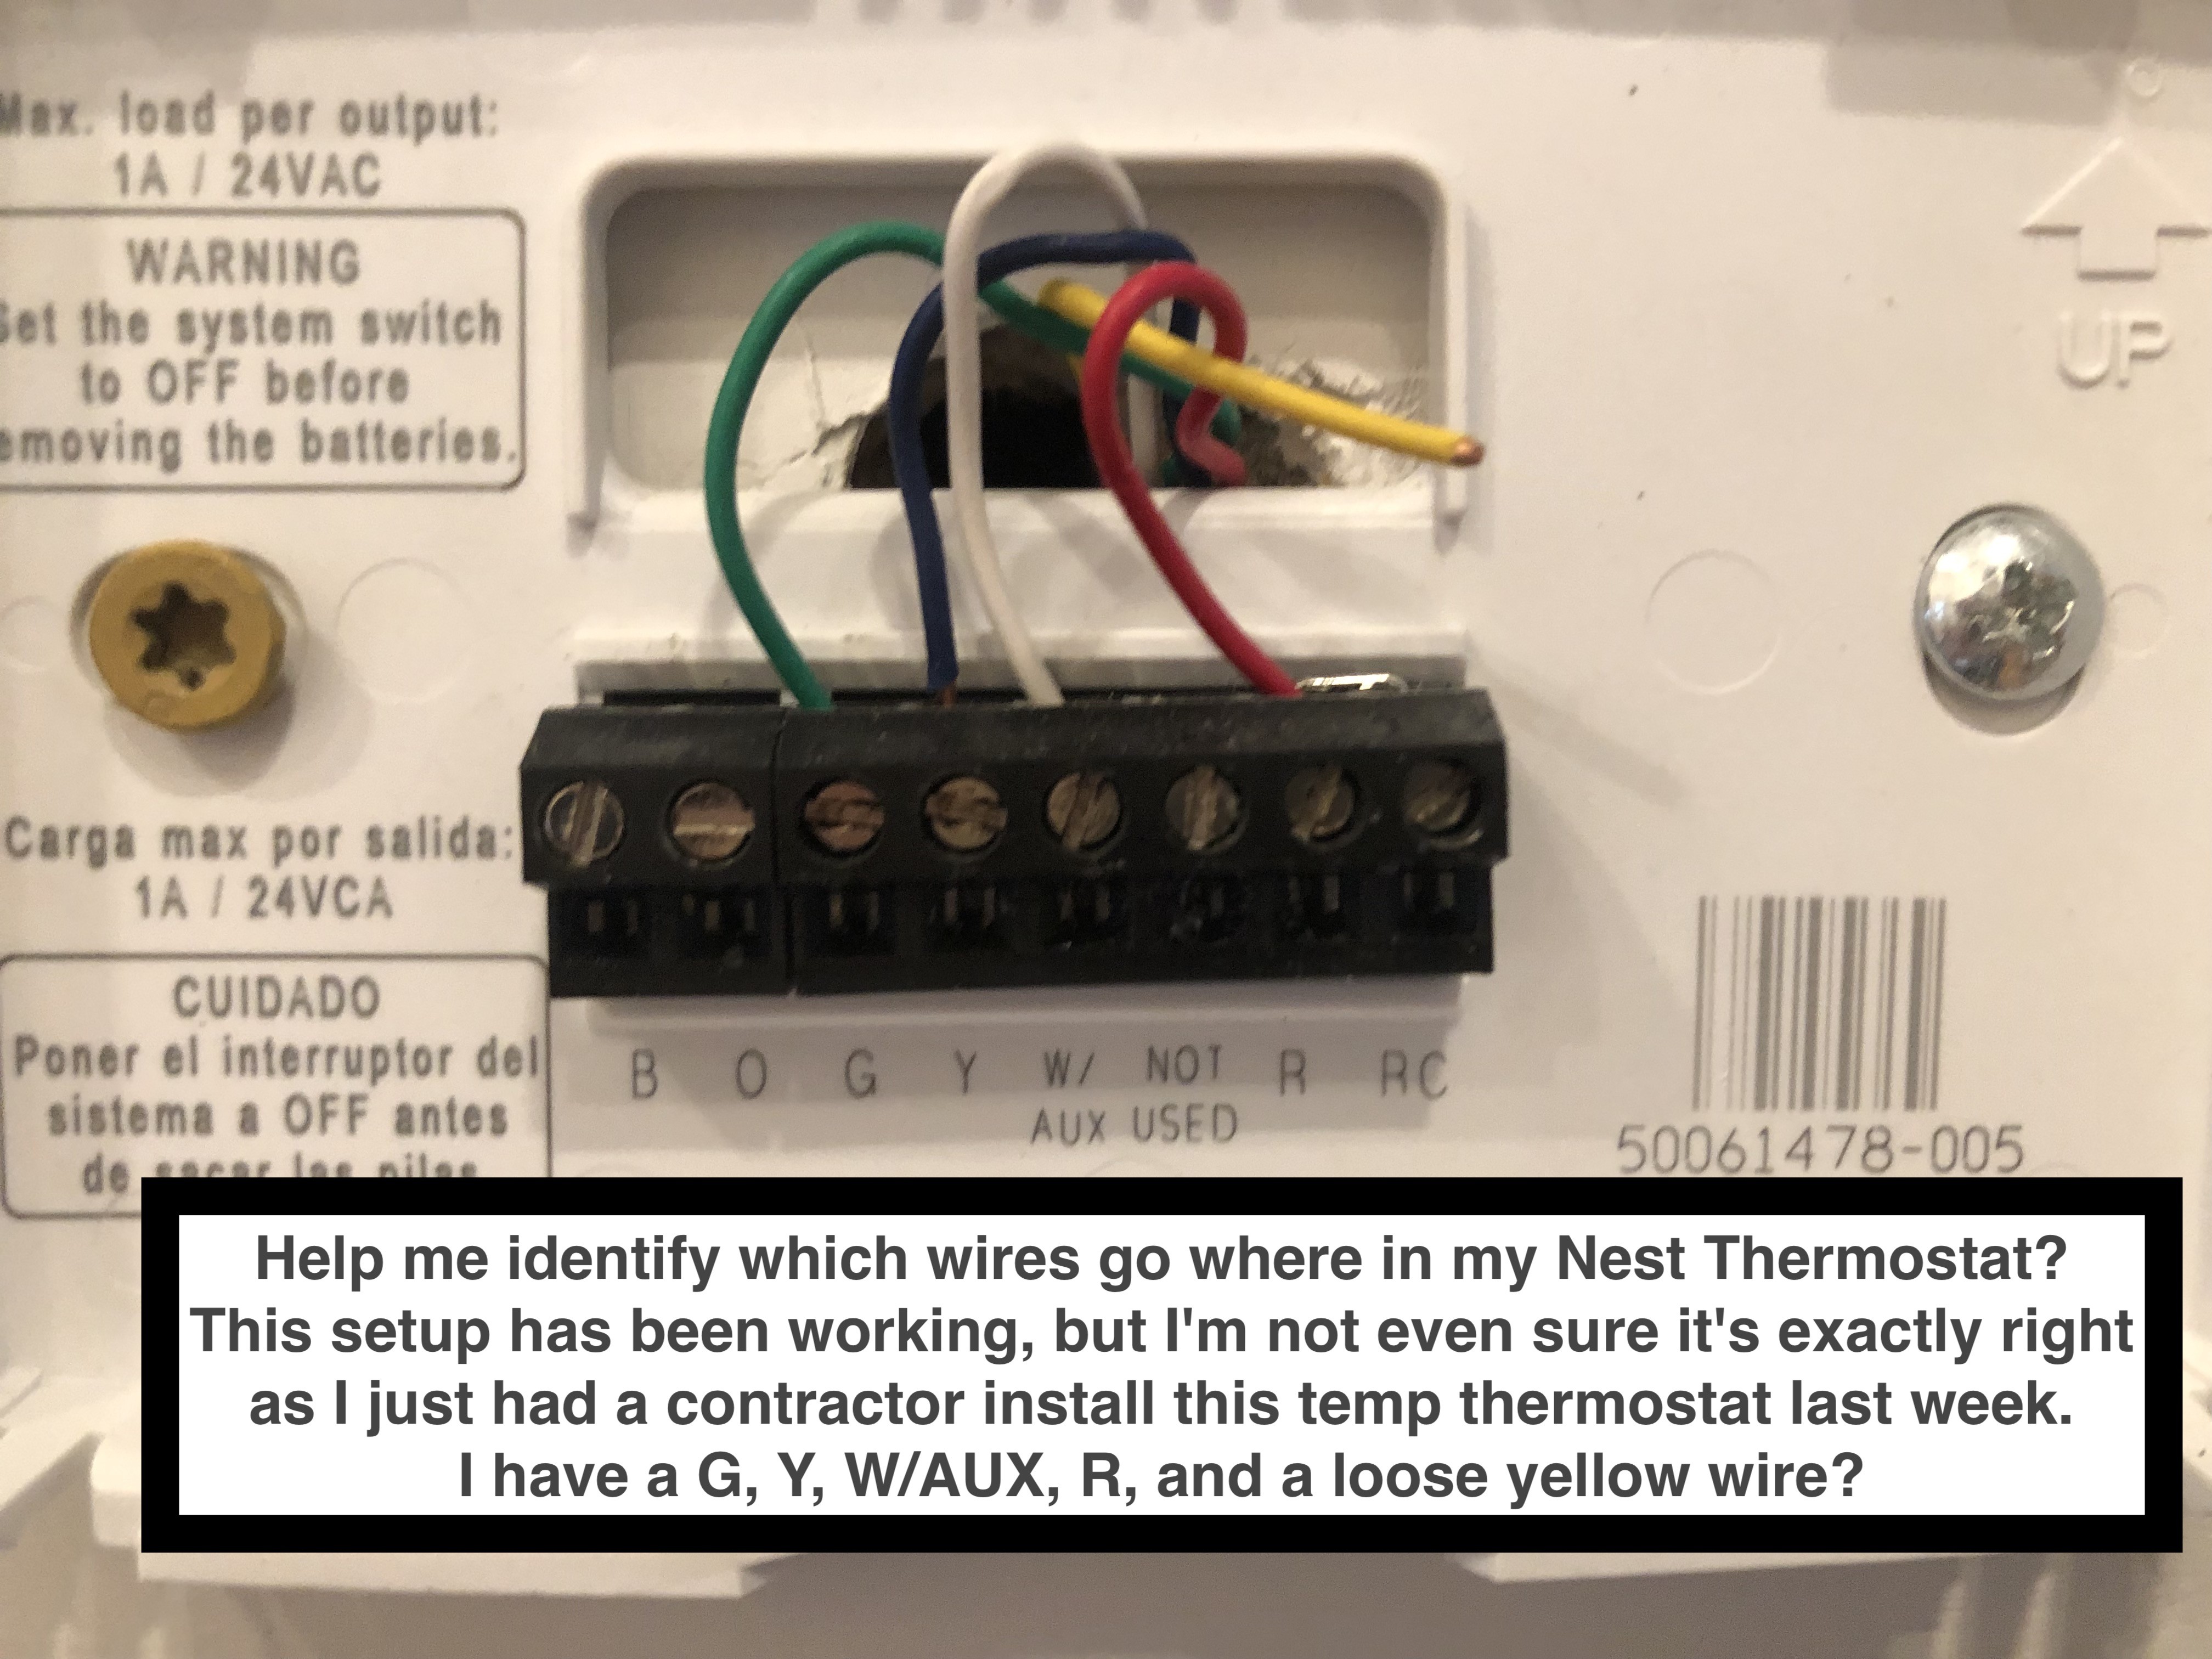 2wire thermostat Wiring Diagram Help Me Identify which Wires Go where In My Nest thermostat Of 2wire thermostat Wiring Diagram